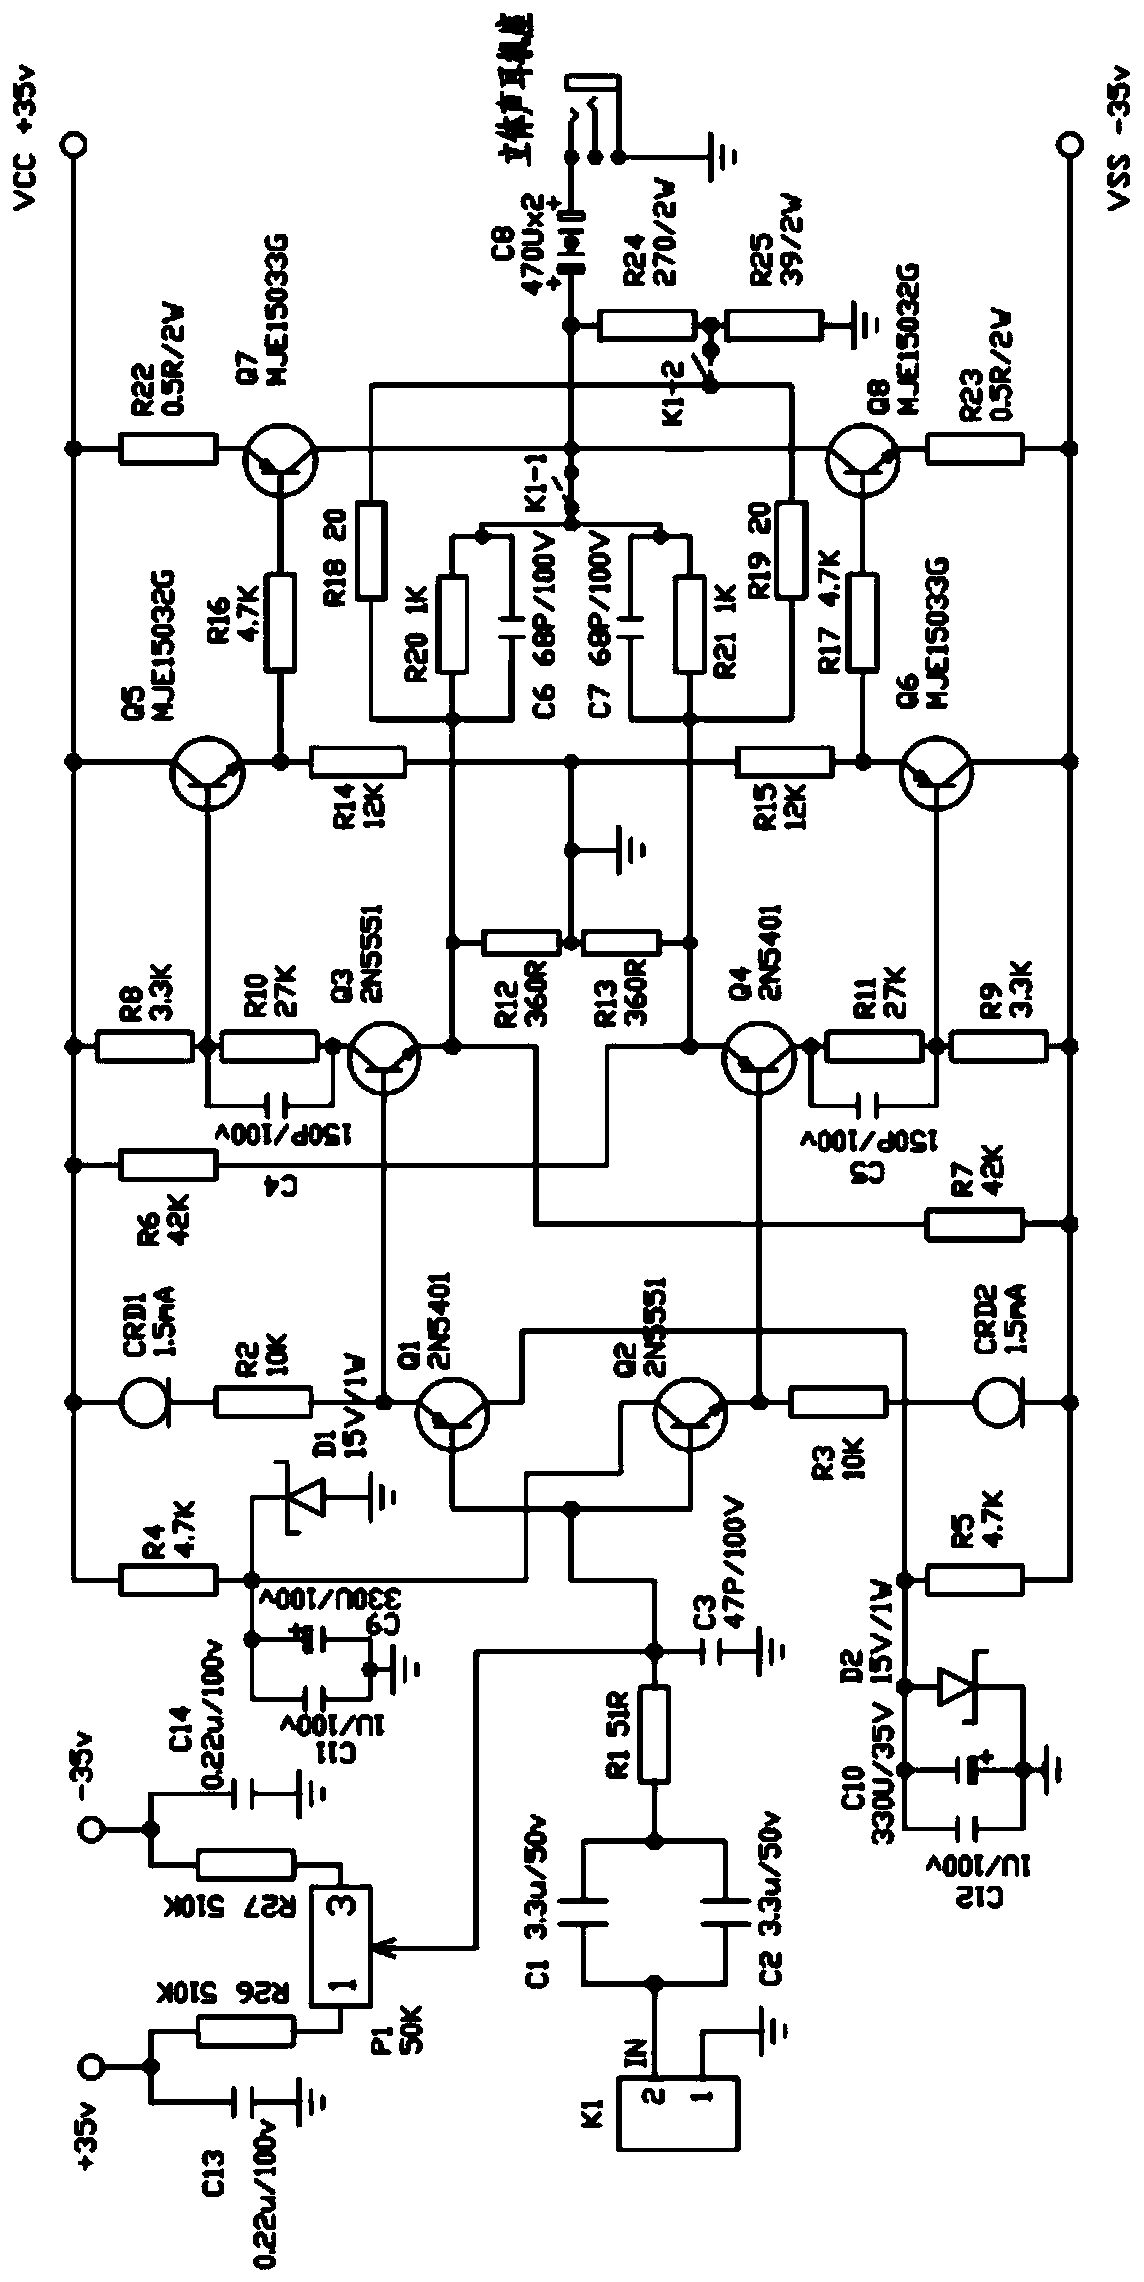 Voltage and current double-feedback amplification circuit, power amplifier and earphone